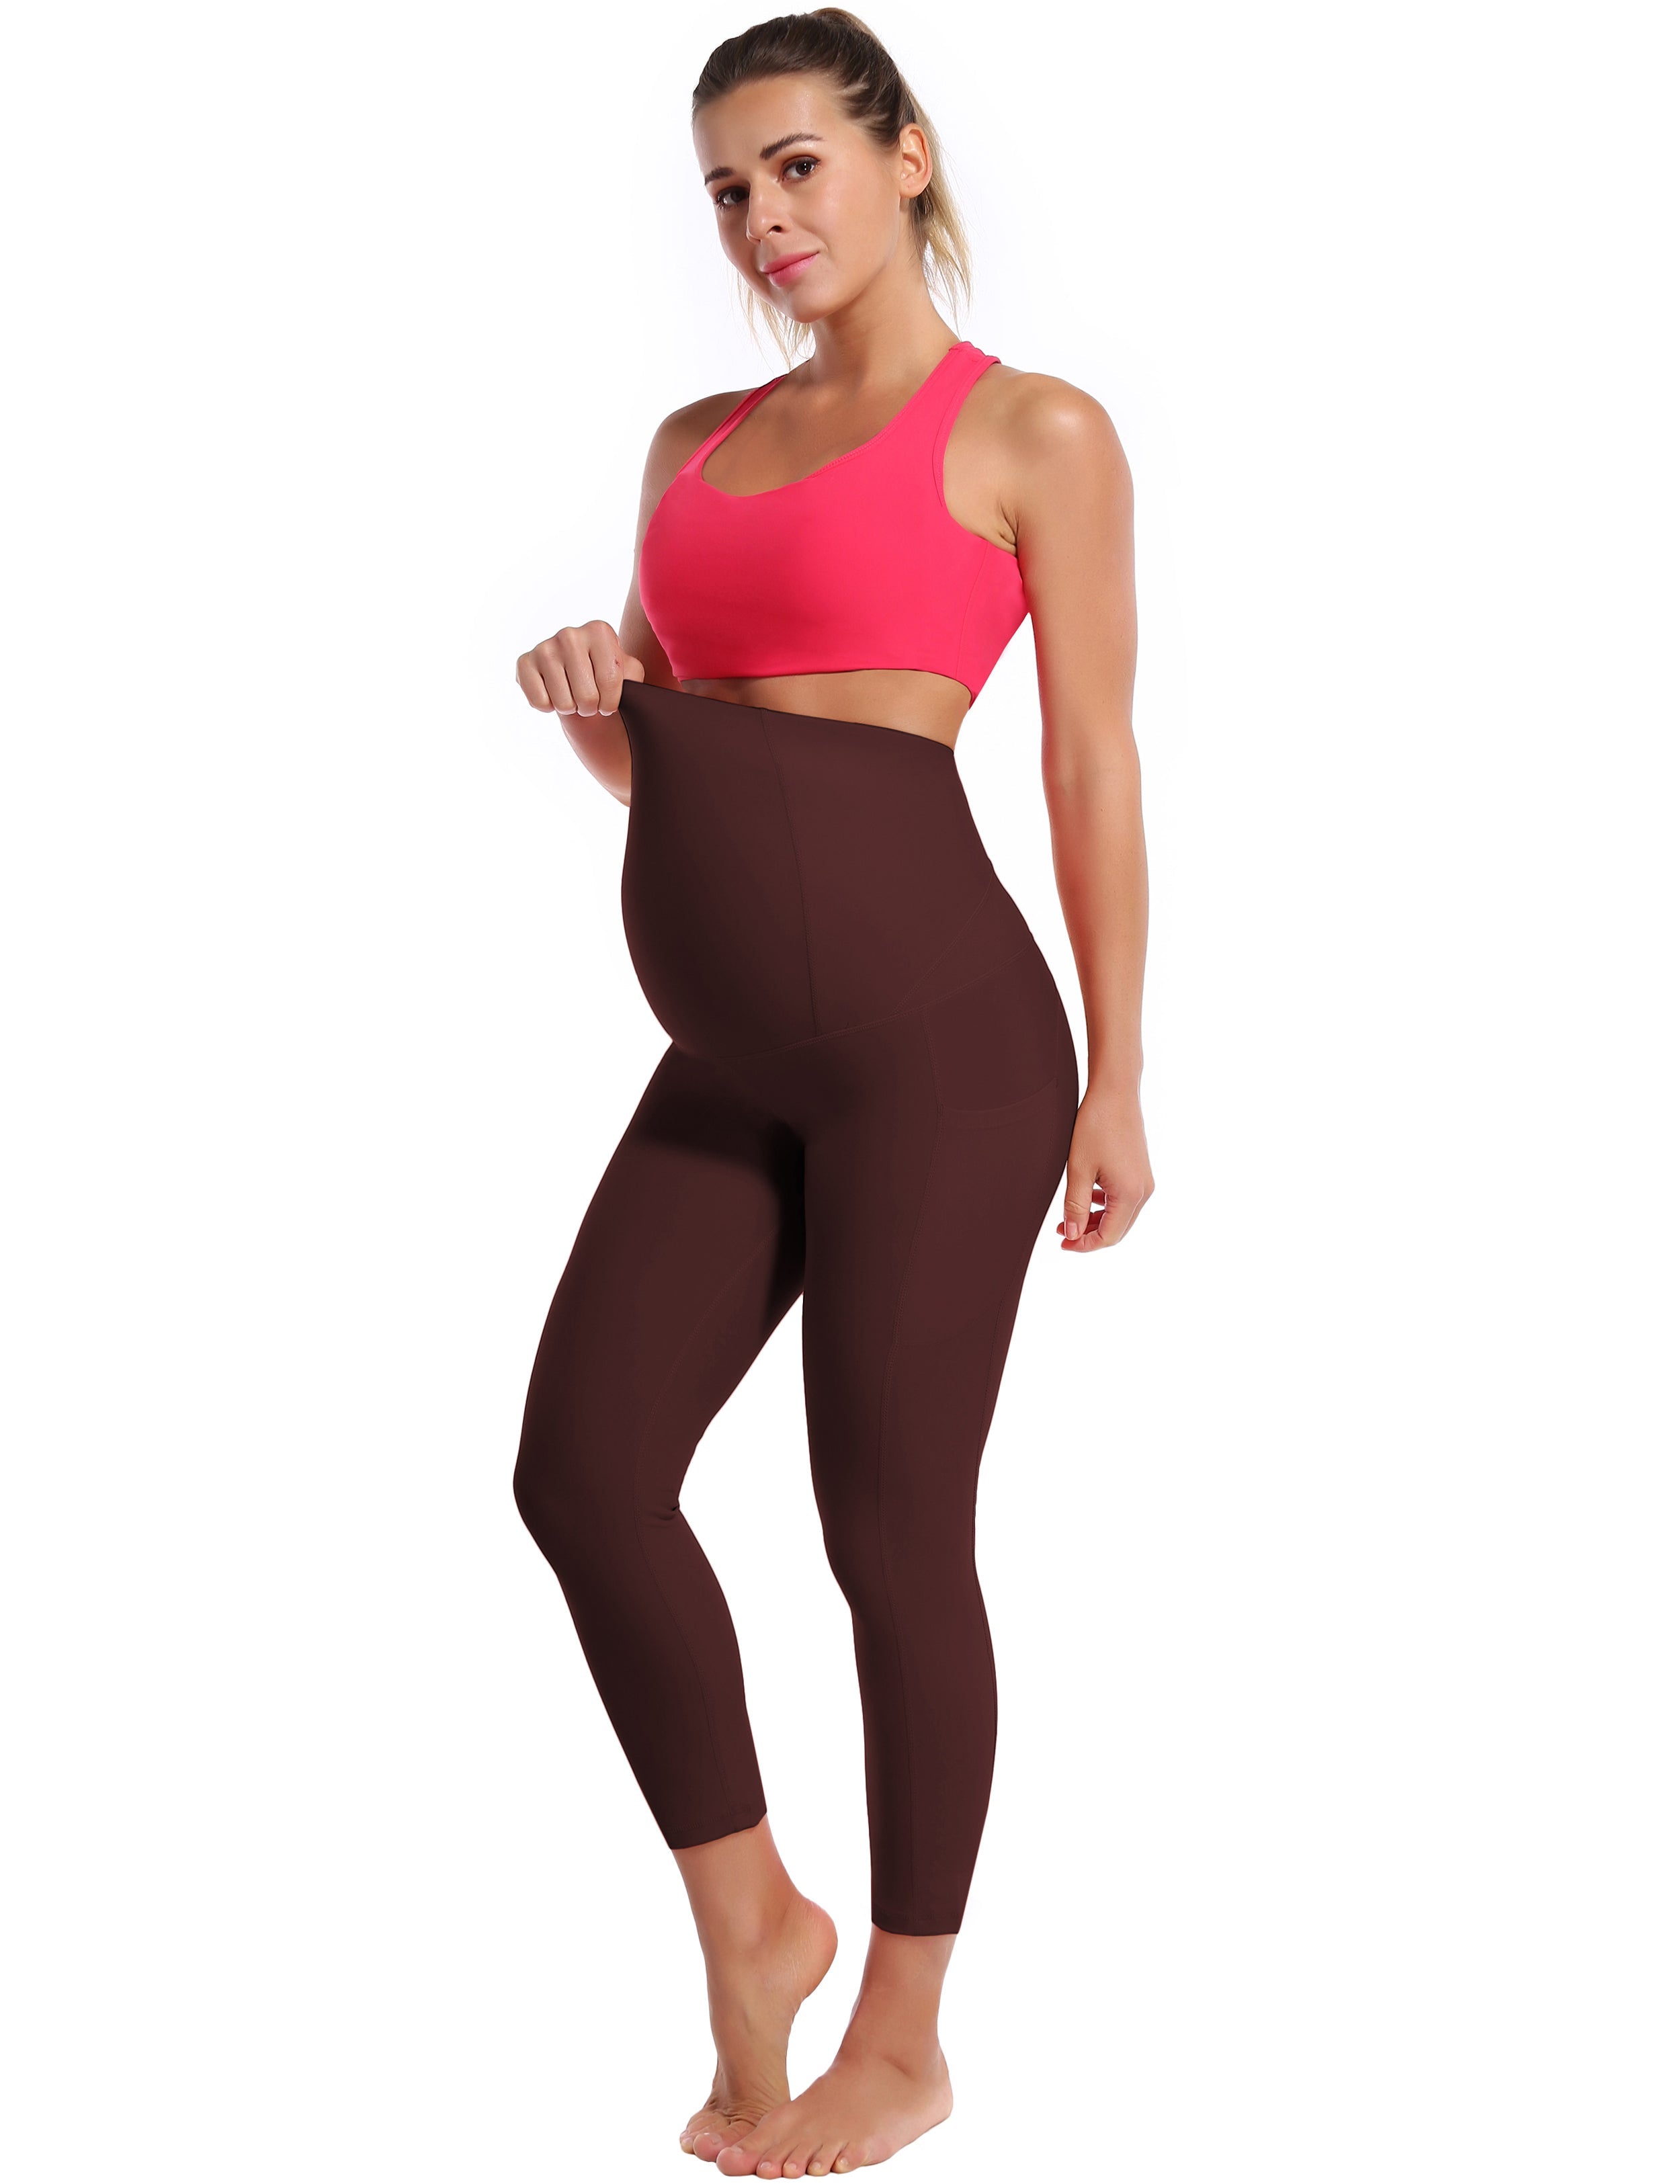 22" Side Pockets Maternity Jogging Pants mahoganymaroon 87%Nylon/13%Spandex Softest-ever fabric High elasticity 4-way stretch Fabric doesn't attract lint easily No see-through Moisture-wicking Machine wash